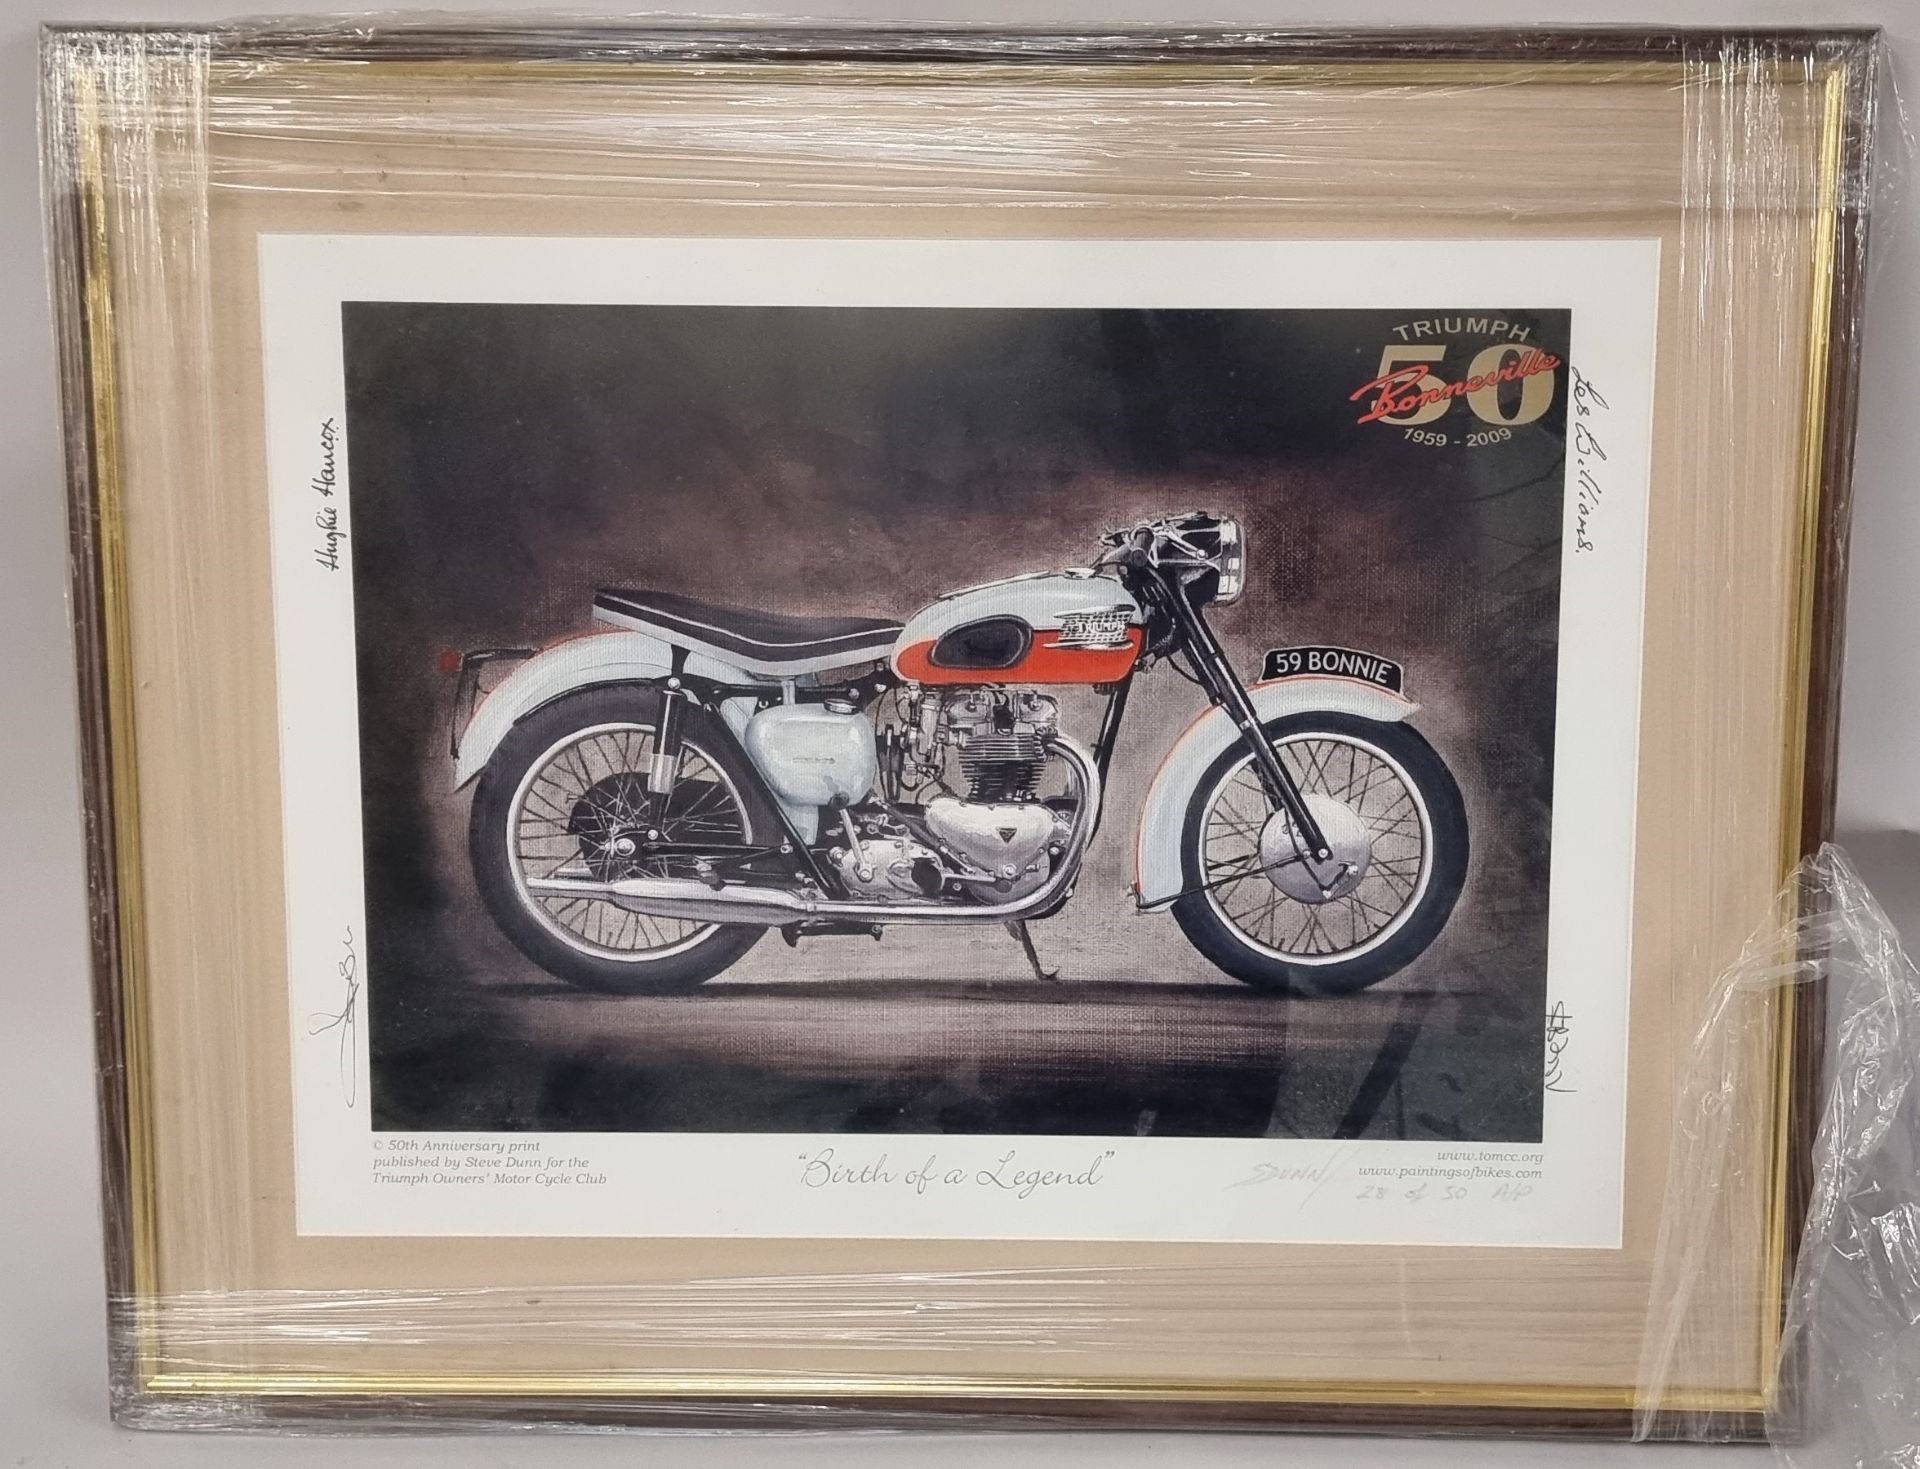 Birth of a Legend, by Steve Dunn, artist proof, 28/50, with four signatures, 32 x 43cm